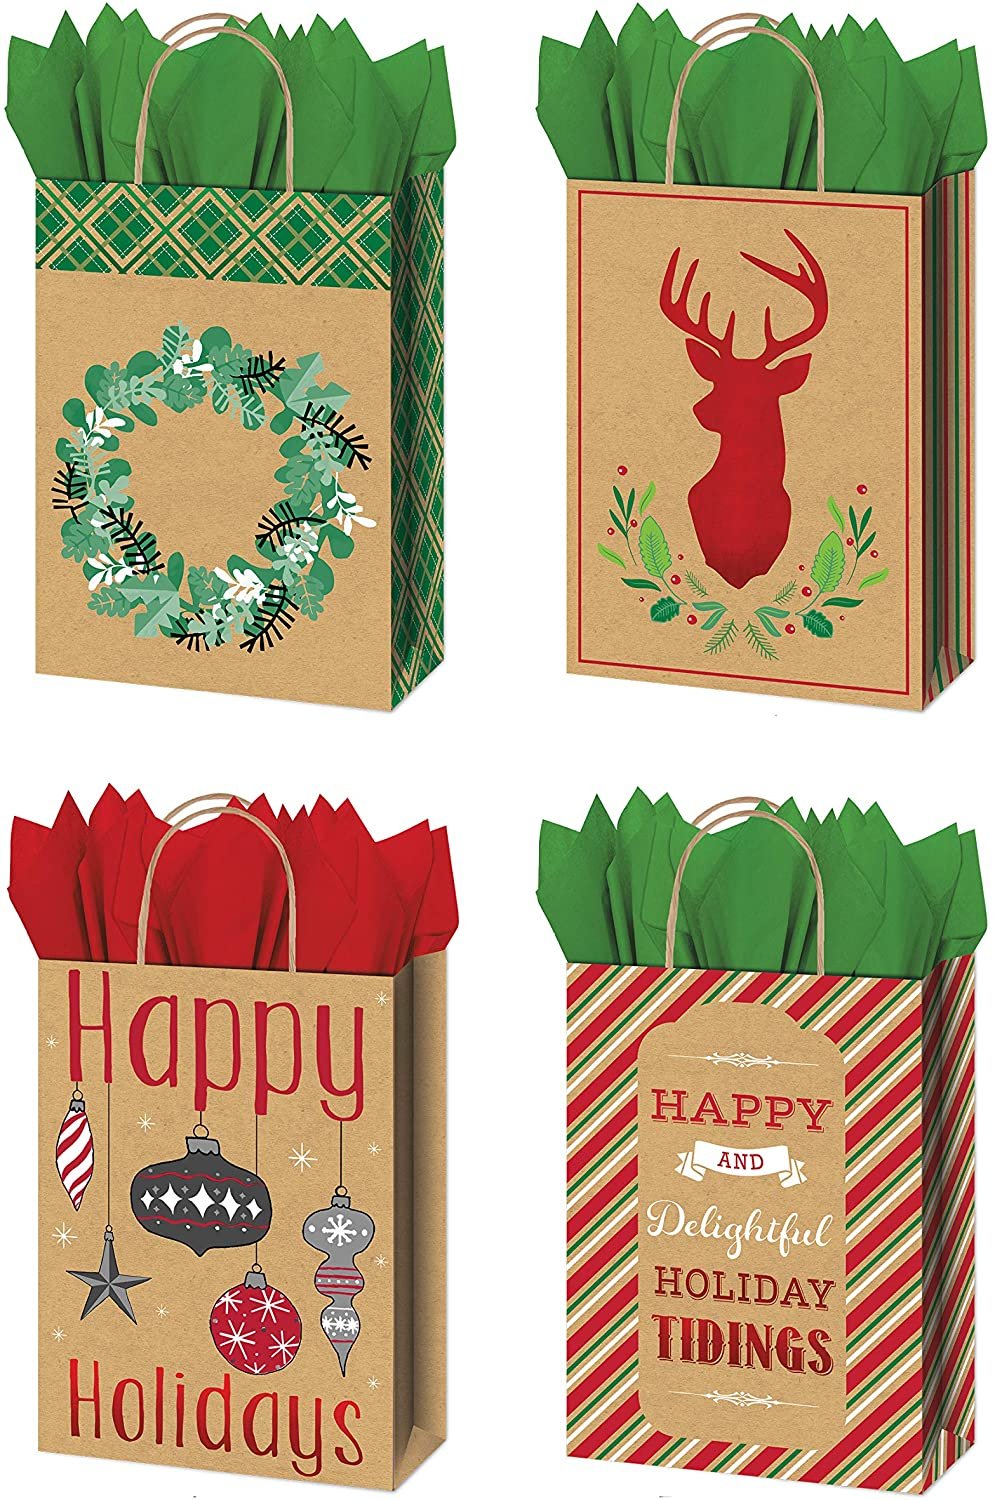 B-THERE Bundle 4ct Christmas Holiday X-Large Kraft Gift Bags Foil Finish of Deer Head, Wreath, Happy Holiday with Ornaments